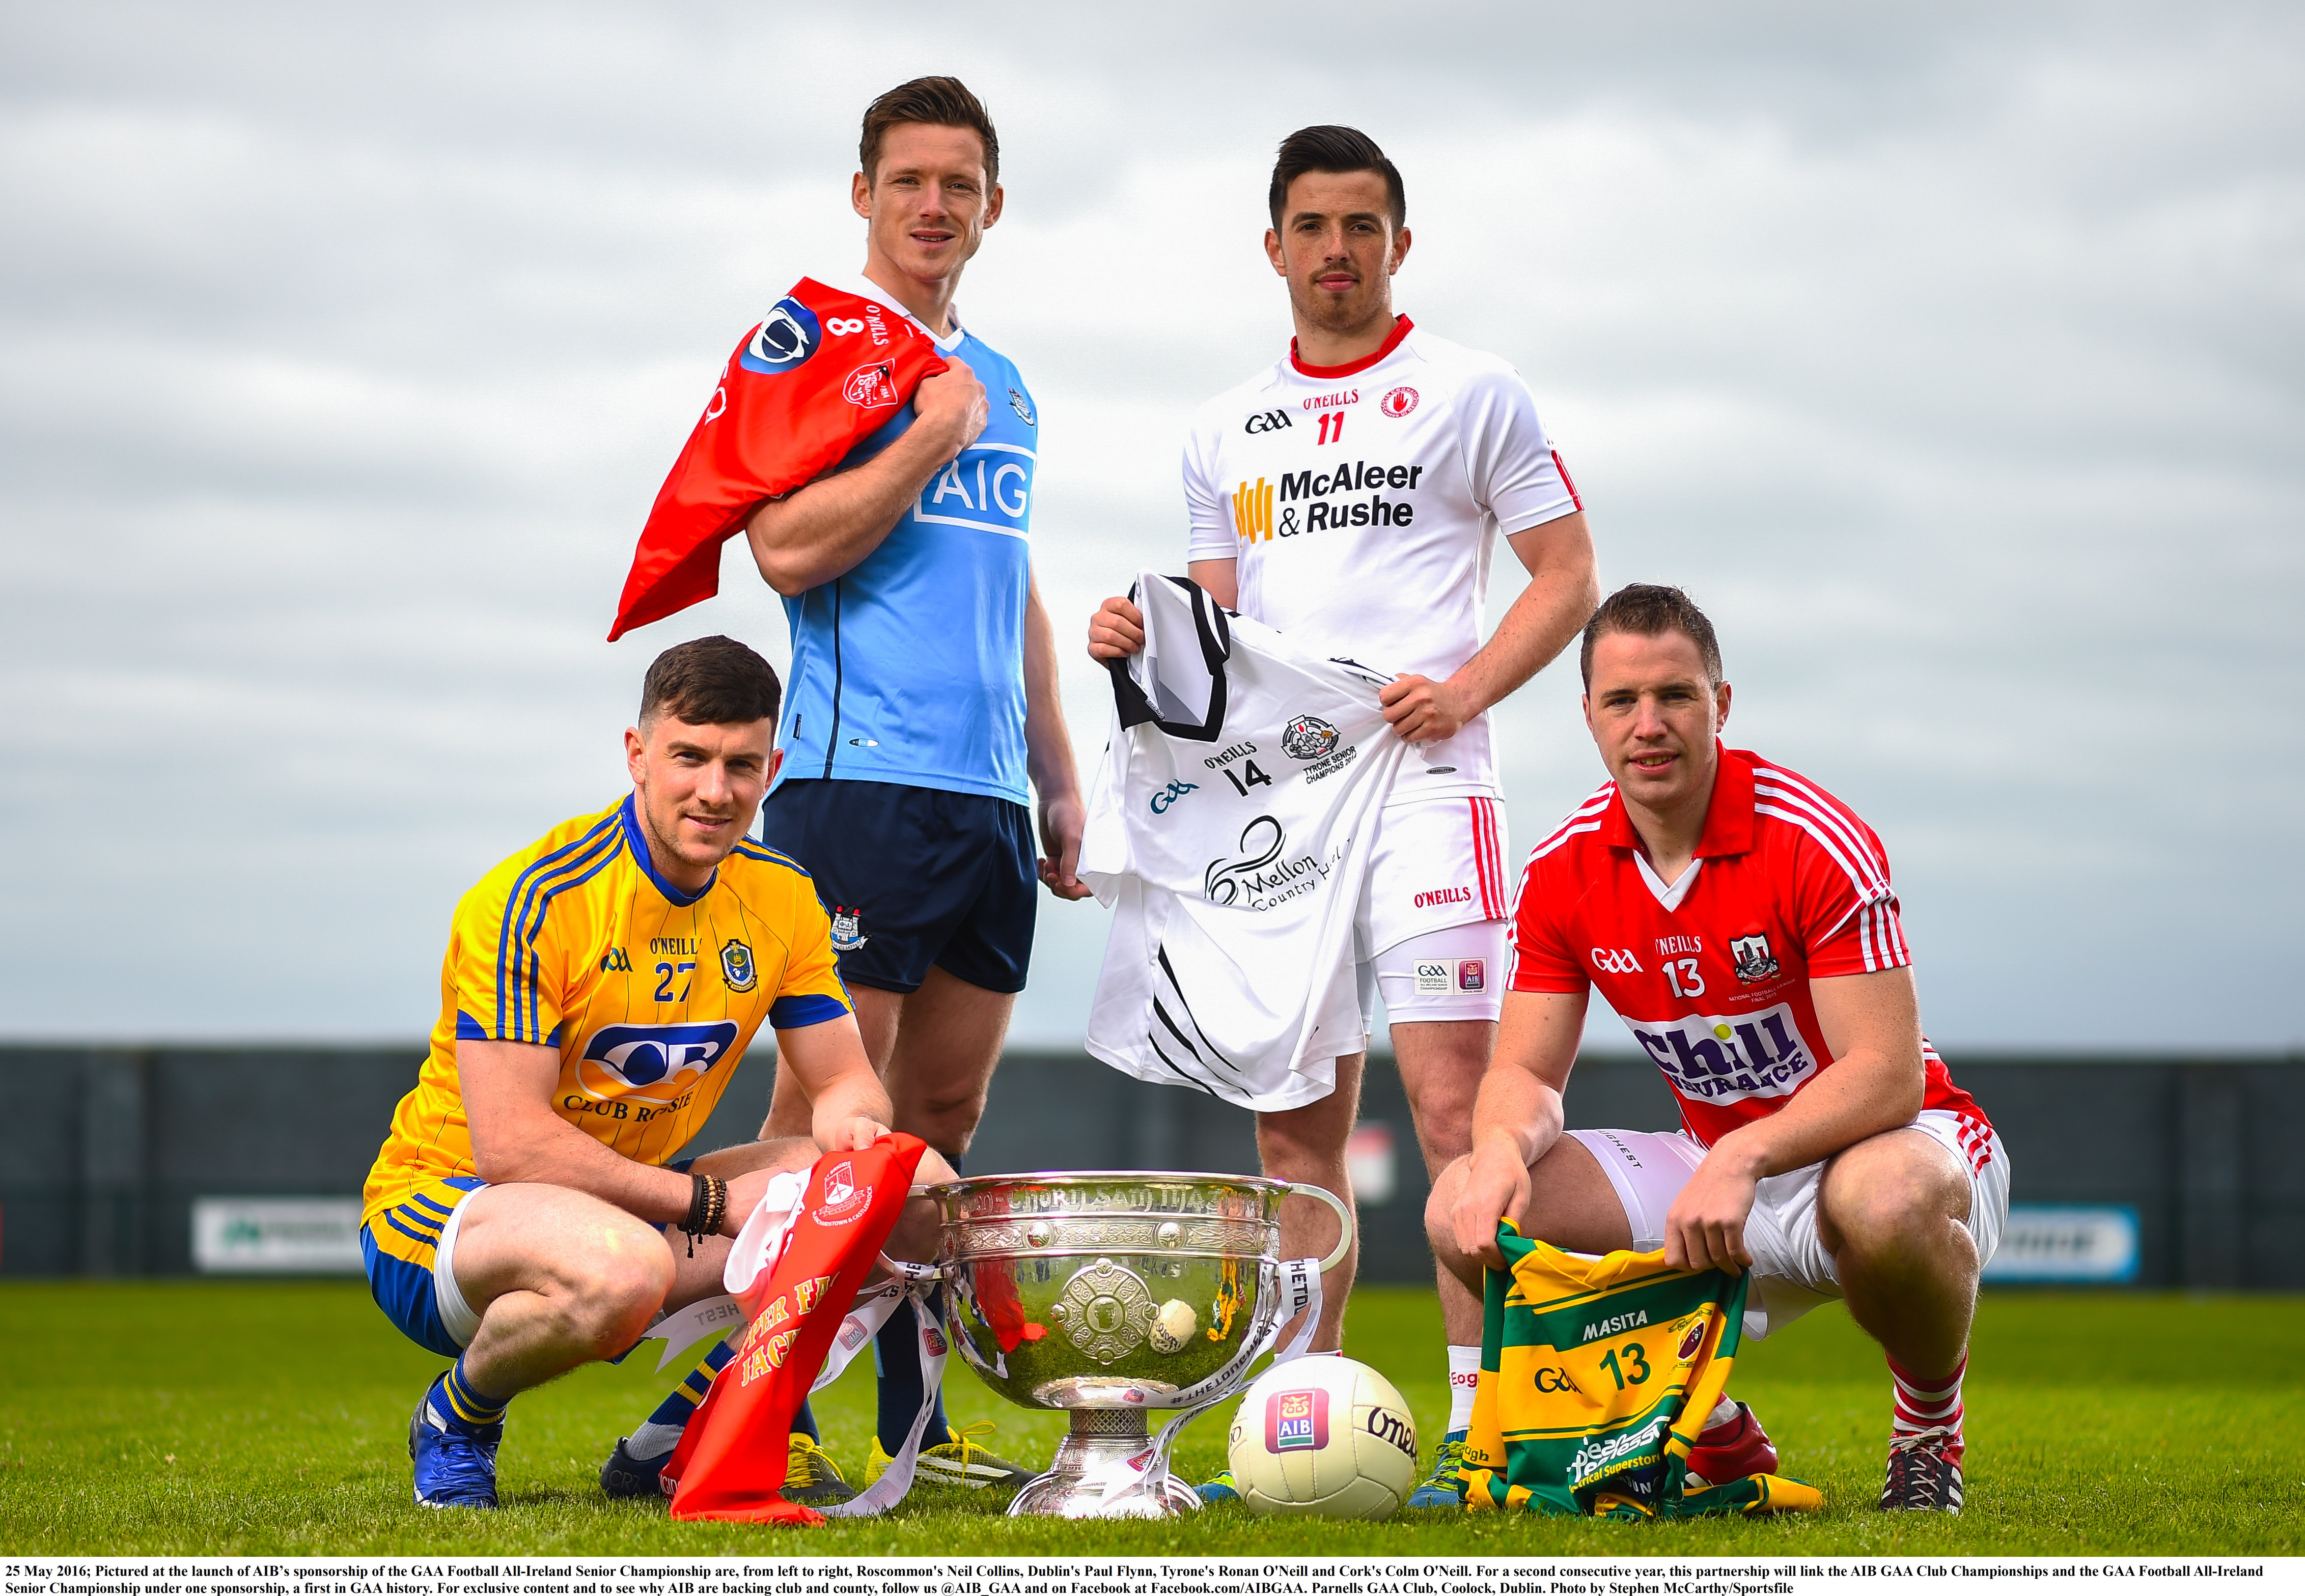 25 May 2016; Pictured at the launch of AIBs sponsorship of the GAA Football All-Ireland Senior Championship are, from left to right, Roscommon's Neil Collins, Dublin's Paul Flynn, Tyrone's Ronan O'Neill and Cork's Colm O'Neill. For a second consecutive year, this partnership will link the AIB GAA Club Championships and the GAA Football All-Ireland Senior Championship under one sponsorship, a first in GAA history. For exclusive content and to see why AIB are backing club and county, follow us @AIB_GAA and on Facebook at Facebook.com/AIBGAA. Parnells GAA Club, Coolock, Dublin. Photo by Stephen McCarthy/Sportsfile